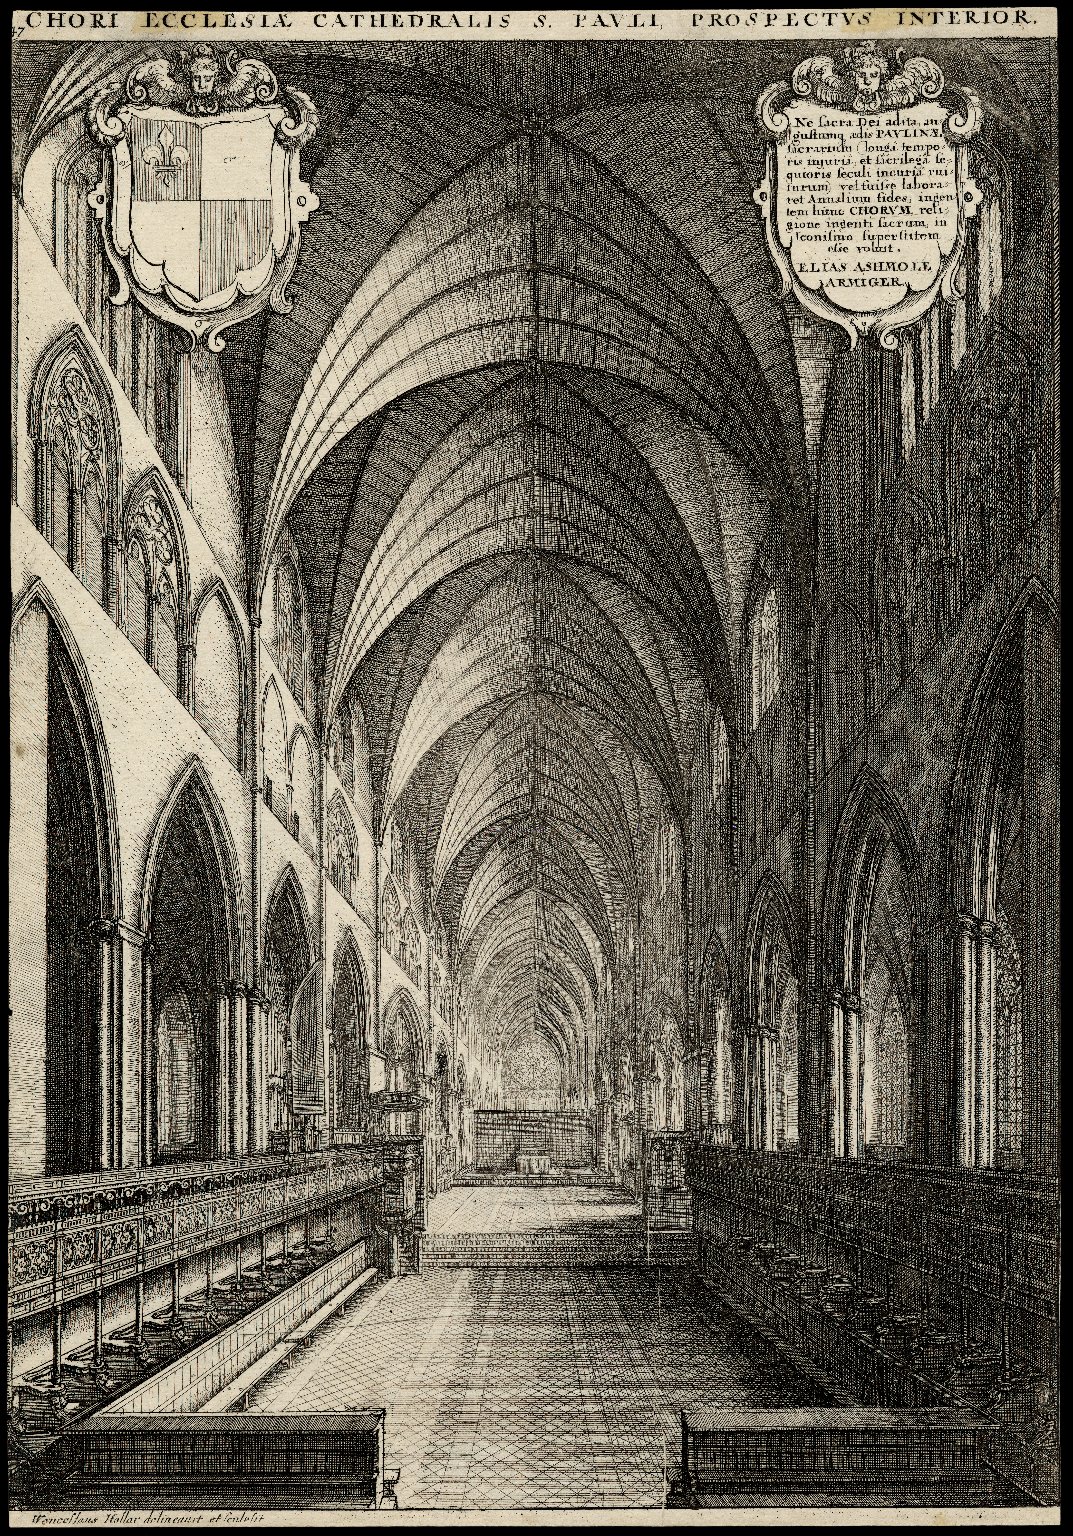 Engraving of the interior of St. Paul’s Cathedral by Wenceslaus Hollar. Image courtesy of the Folger Digital Image Collection.